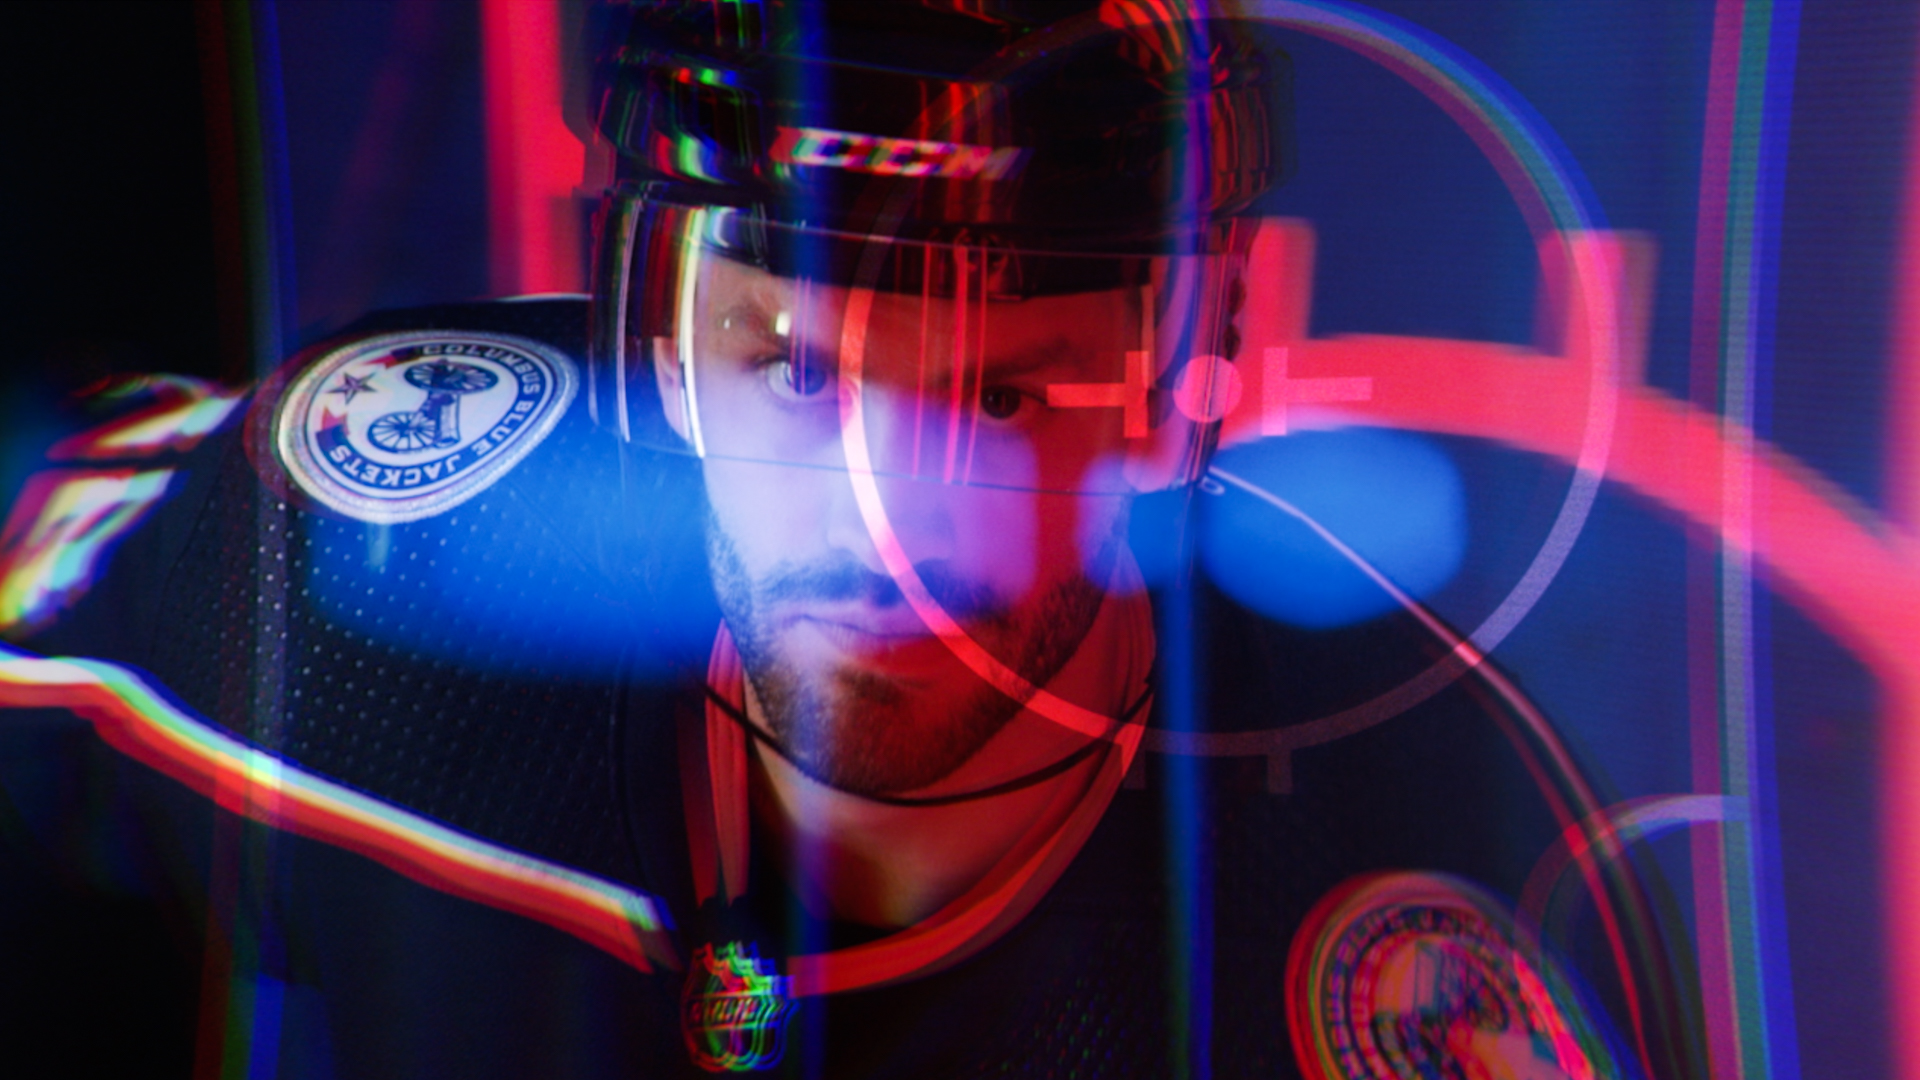 Hockey Player starring at the camera with lighting effects overlayed